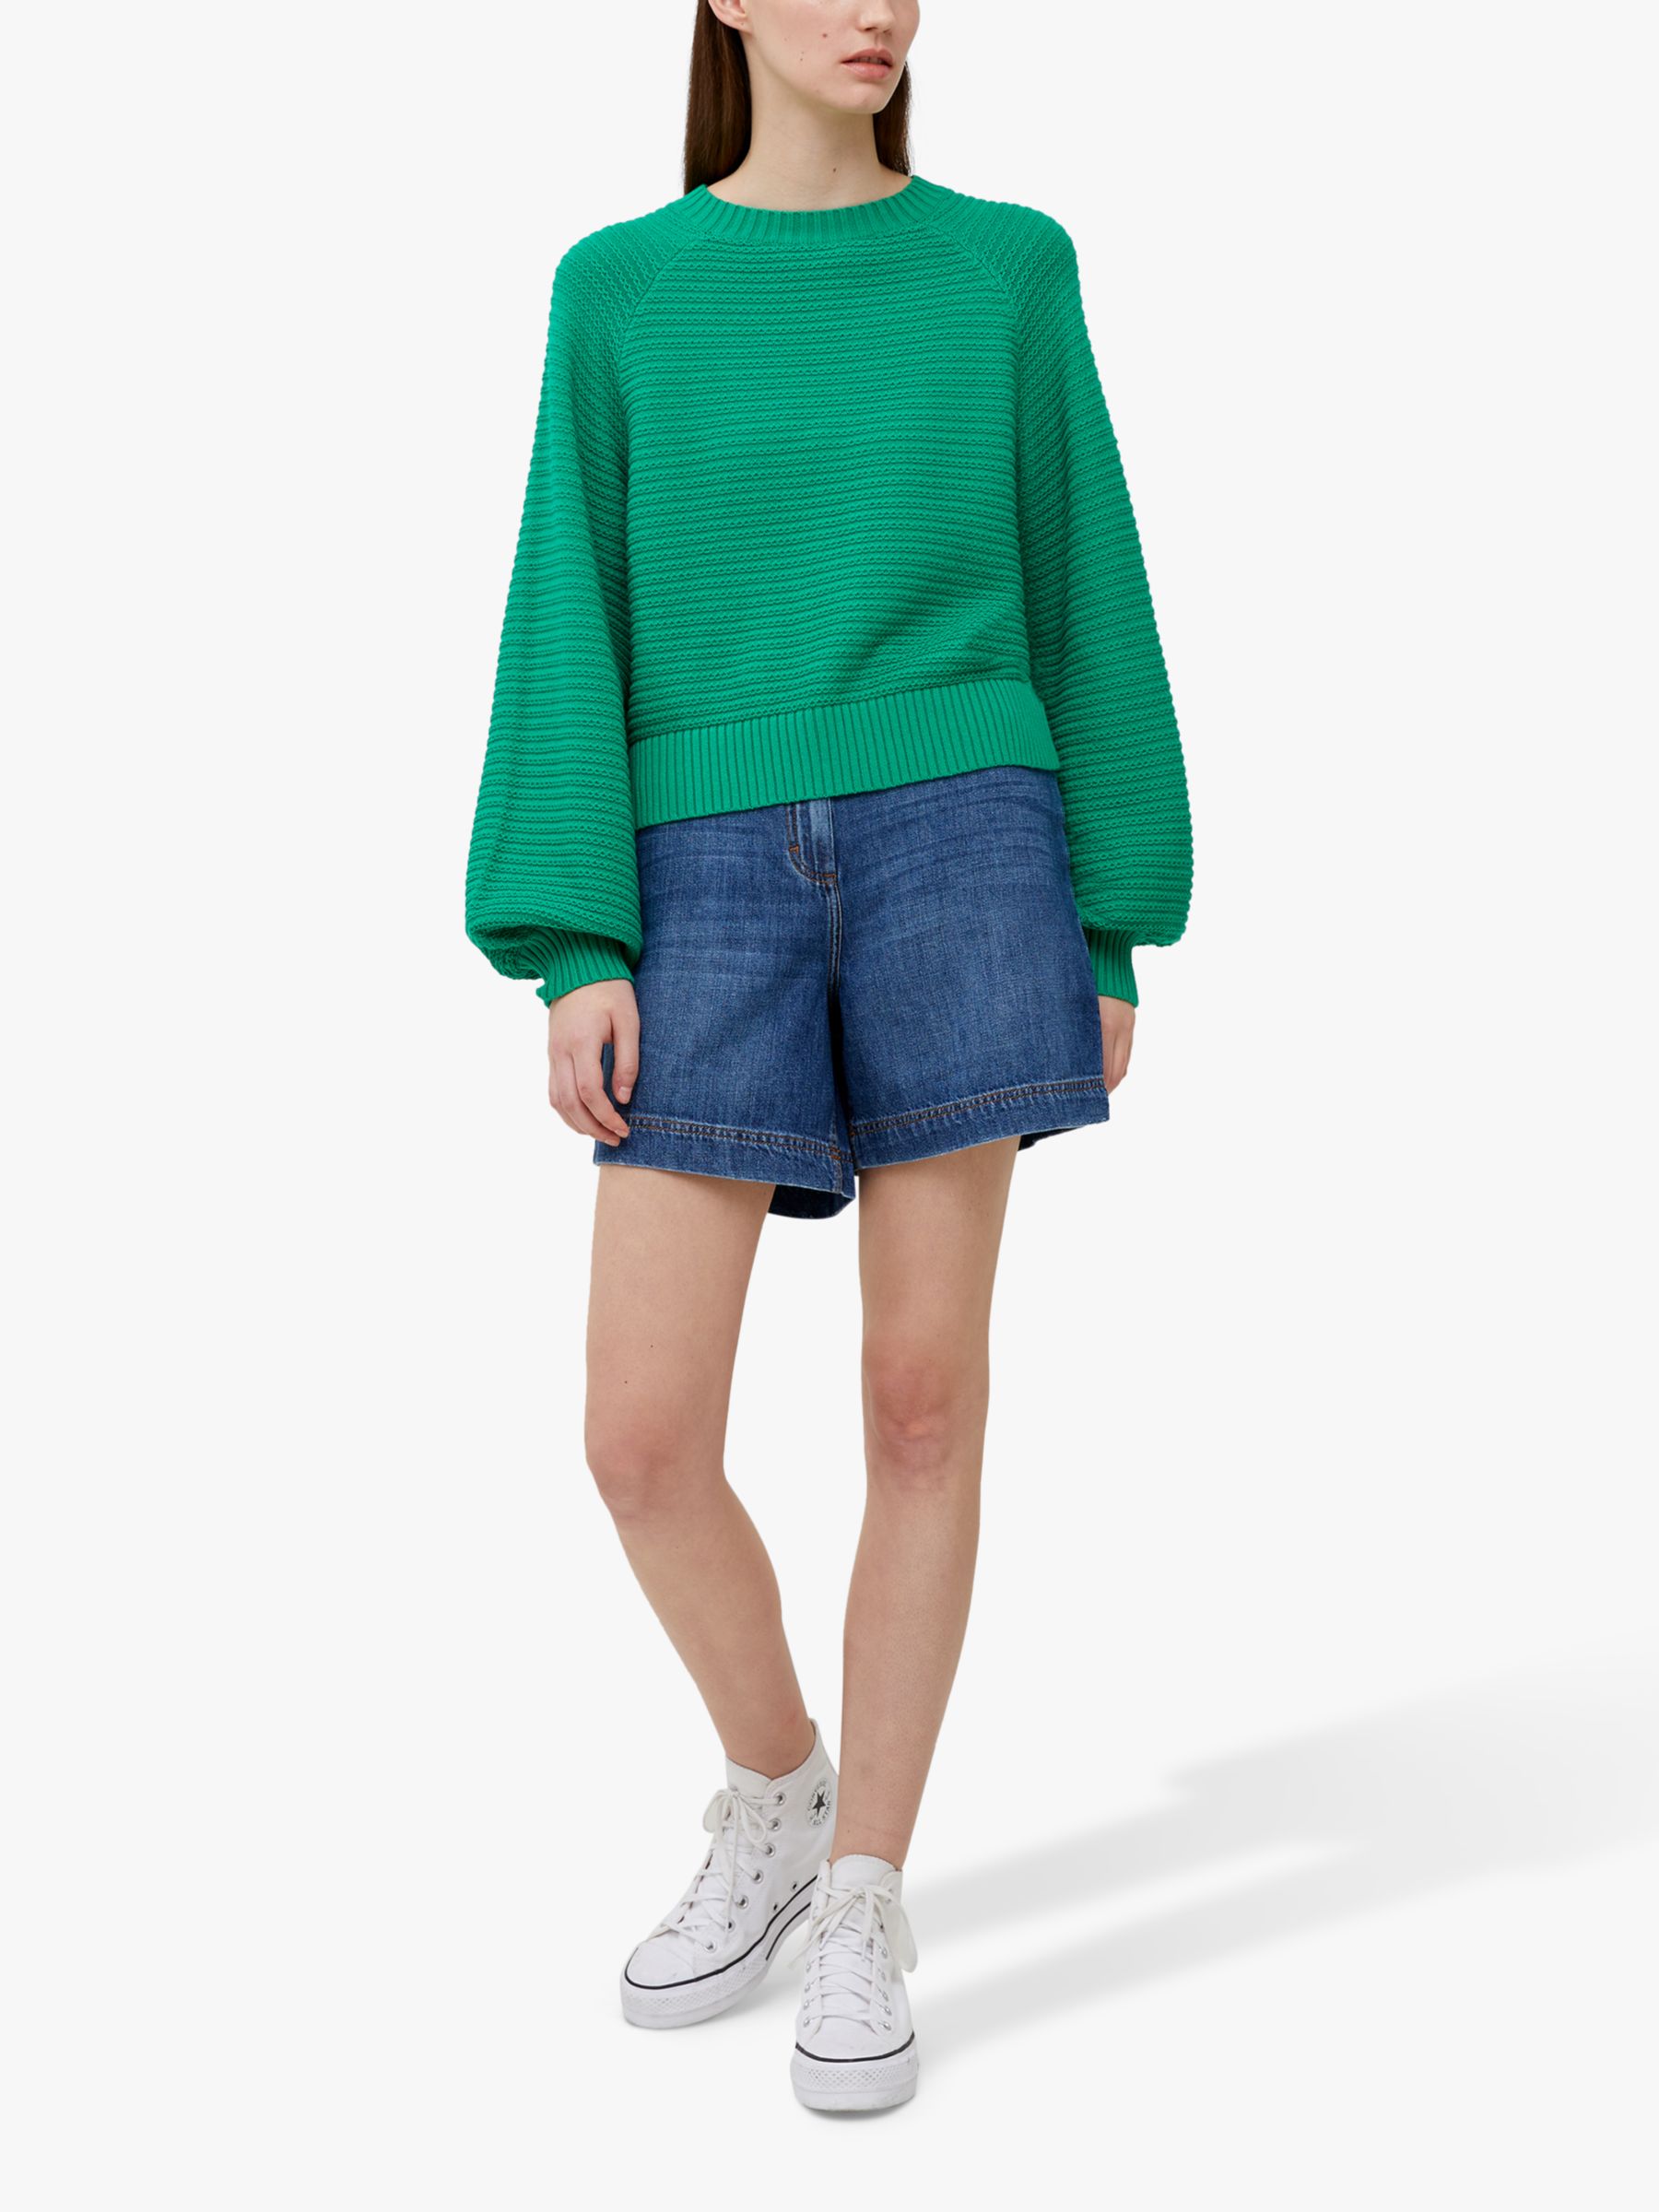 French Connection Lily Mozart Cotton Jumper, Jelly Bean, XS